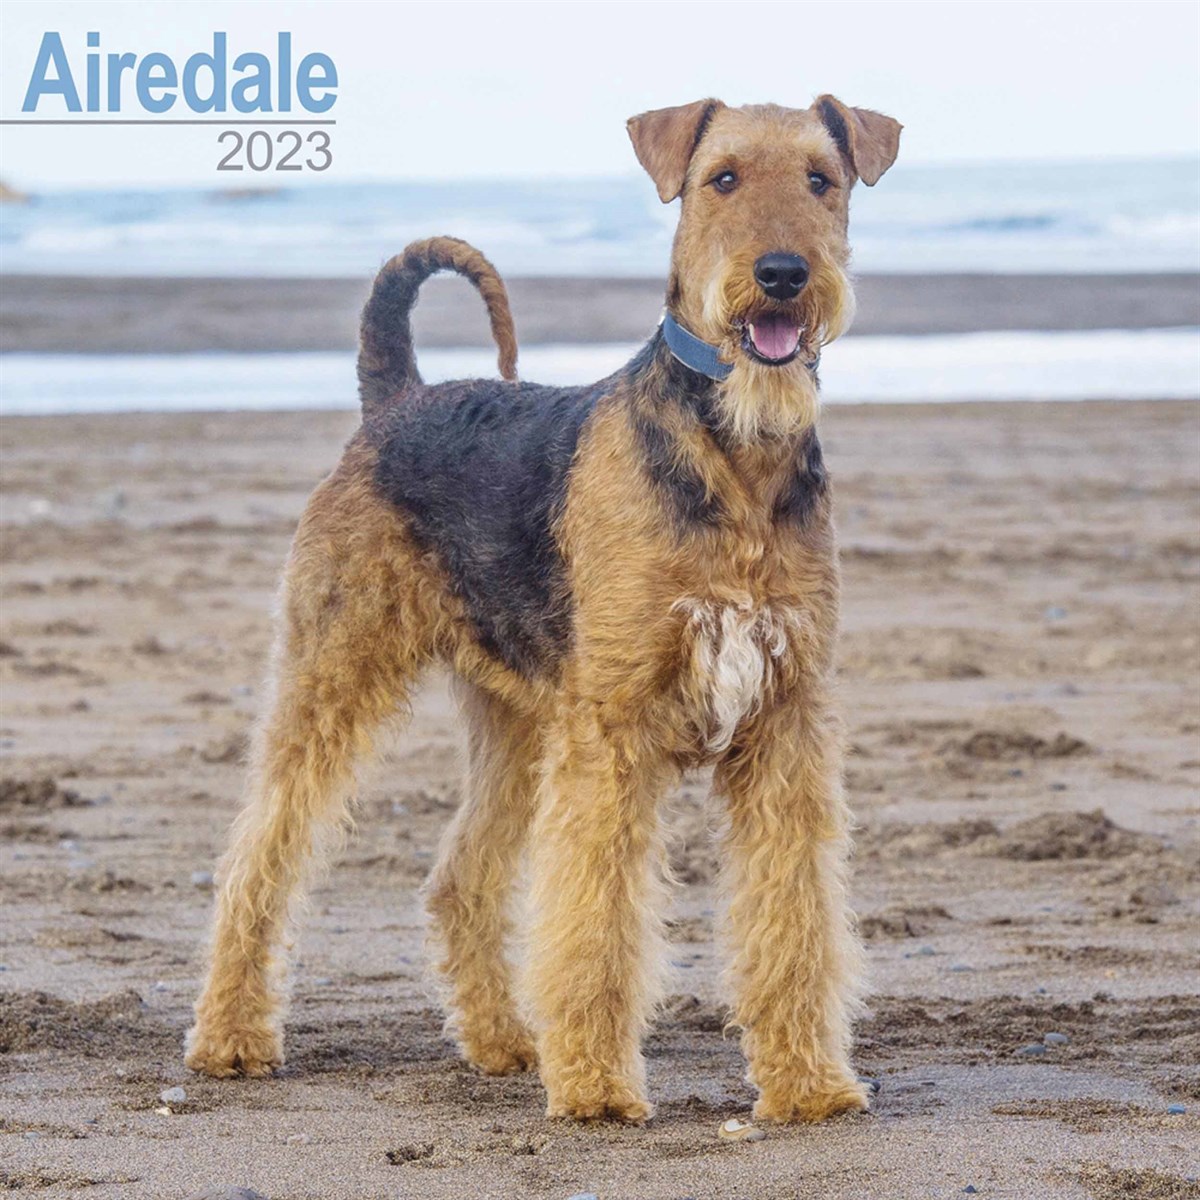 Airedale Terrier 2023 Calendars